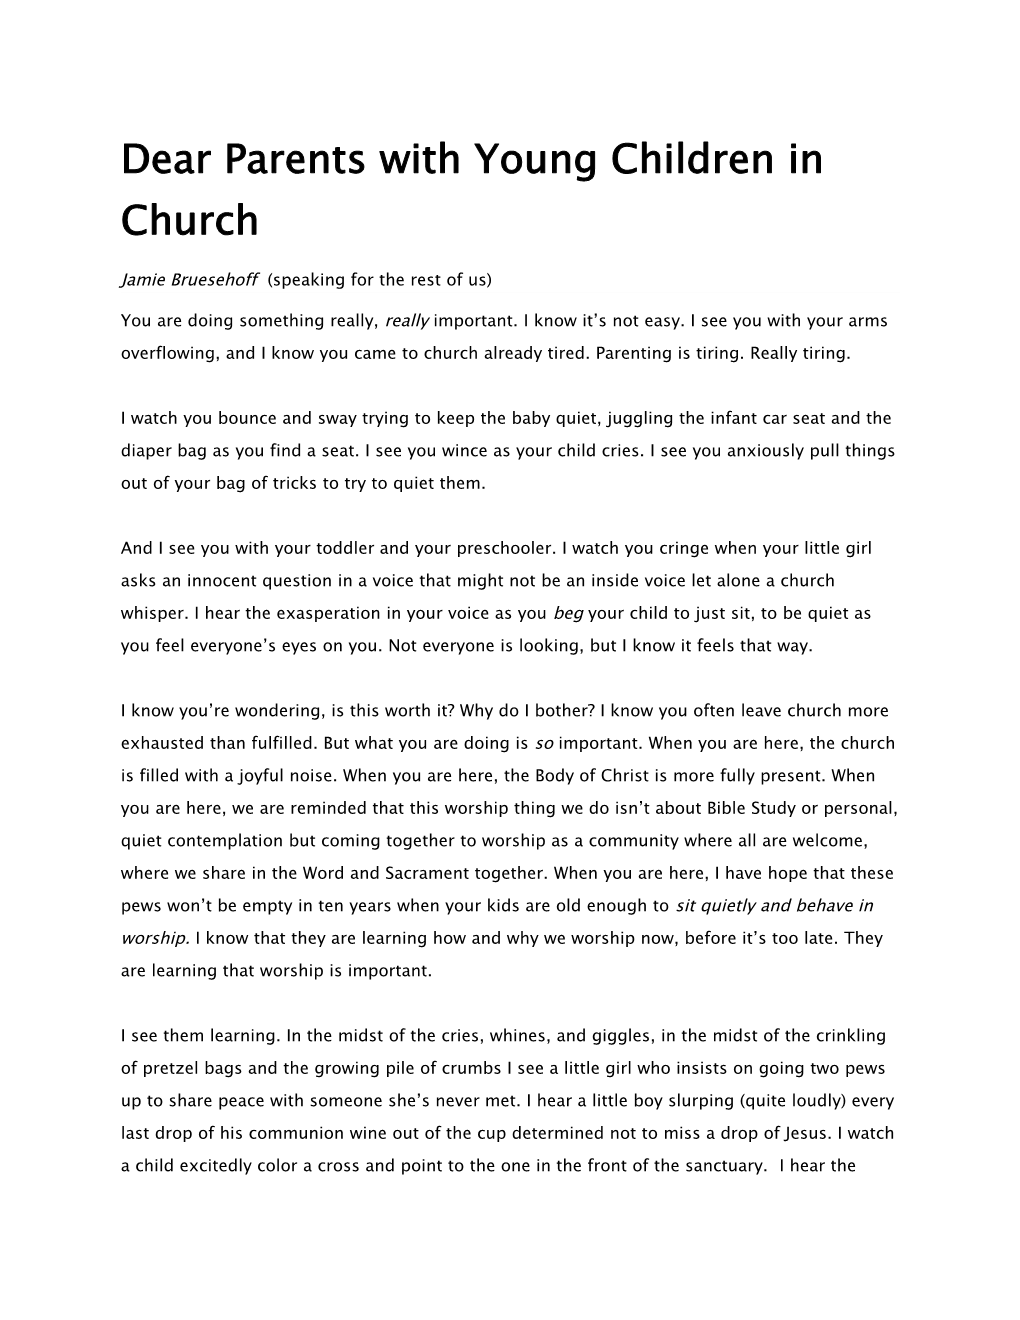 Dear Parents with Young Children in Church